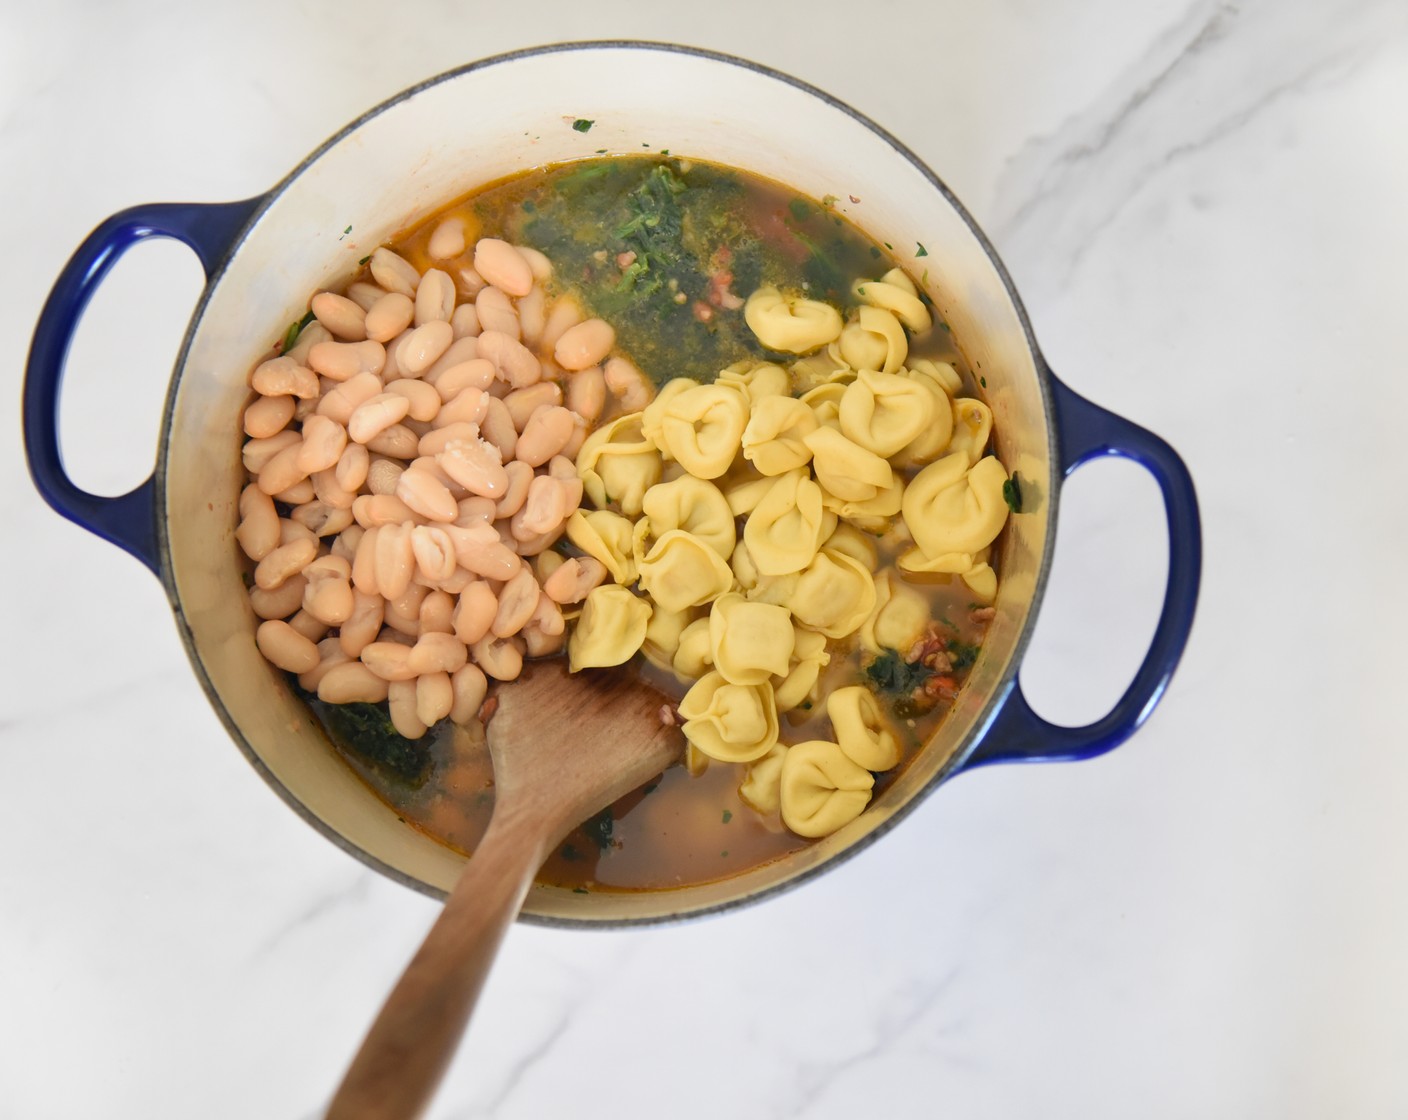 step 5 Once the liquid is boiling, turn the heat back down to medium-high. Add in the Cheese Tortellini (1 pckg) and Cannellini White Kidney Beans (1 can). Cover the pot with the lid and simmer for 6 minutes until the tortellini is just cooked.